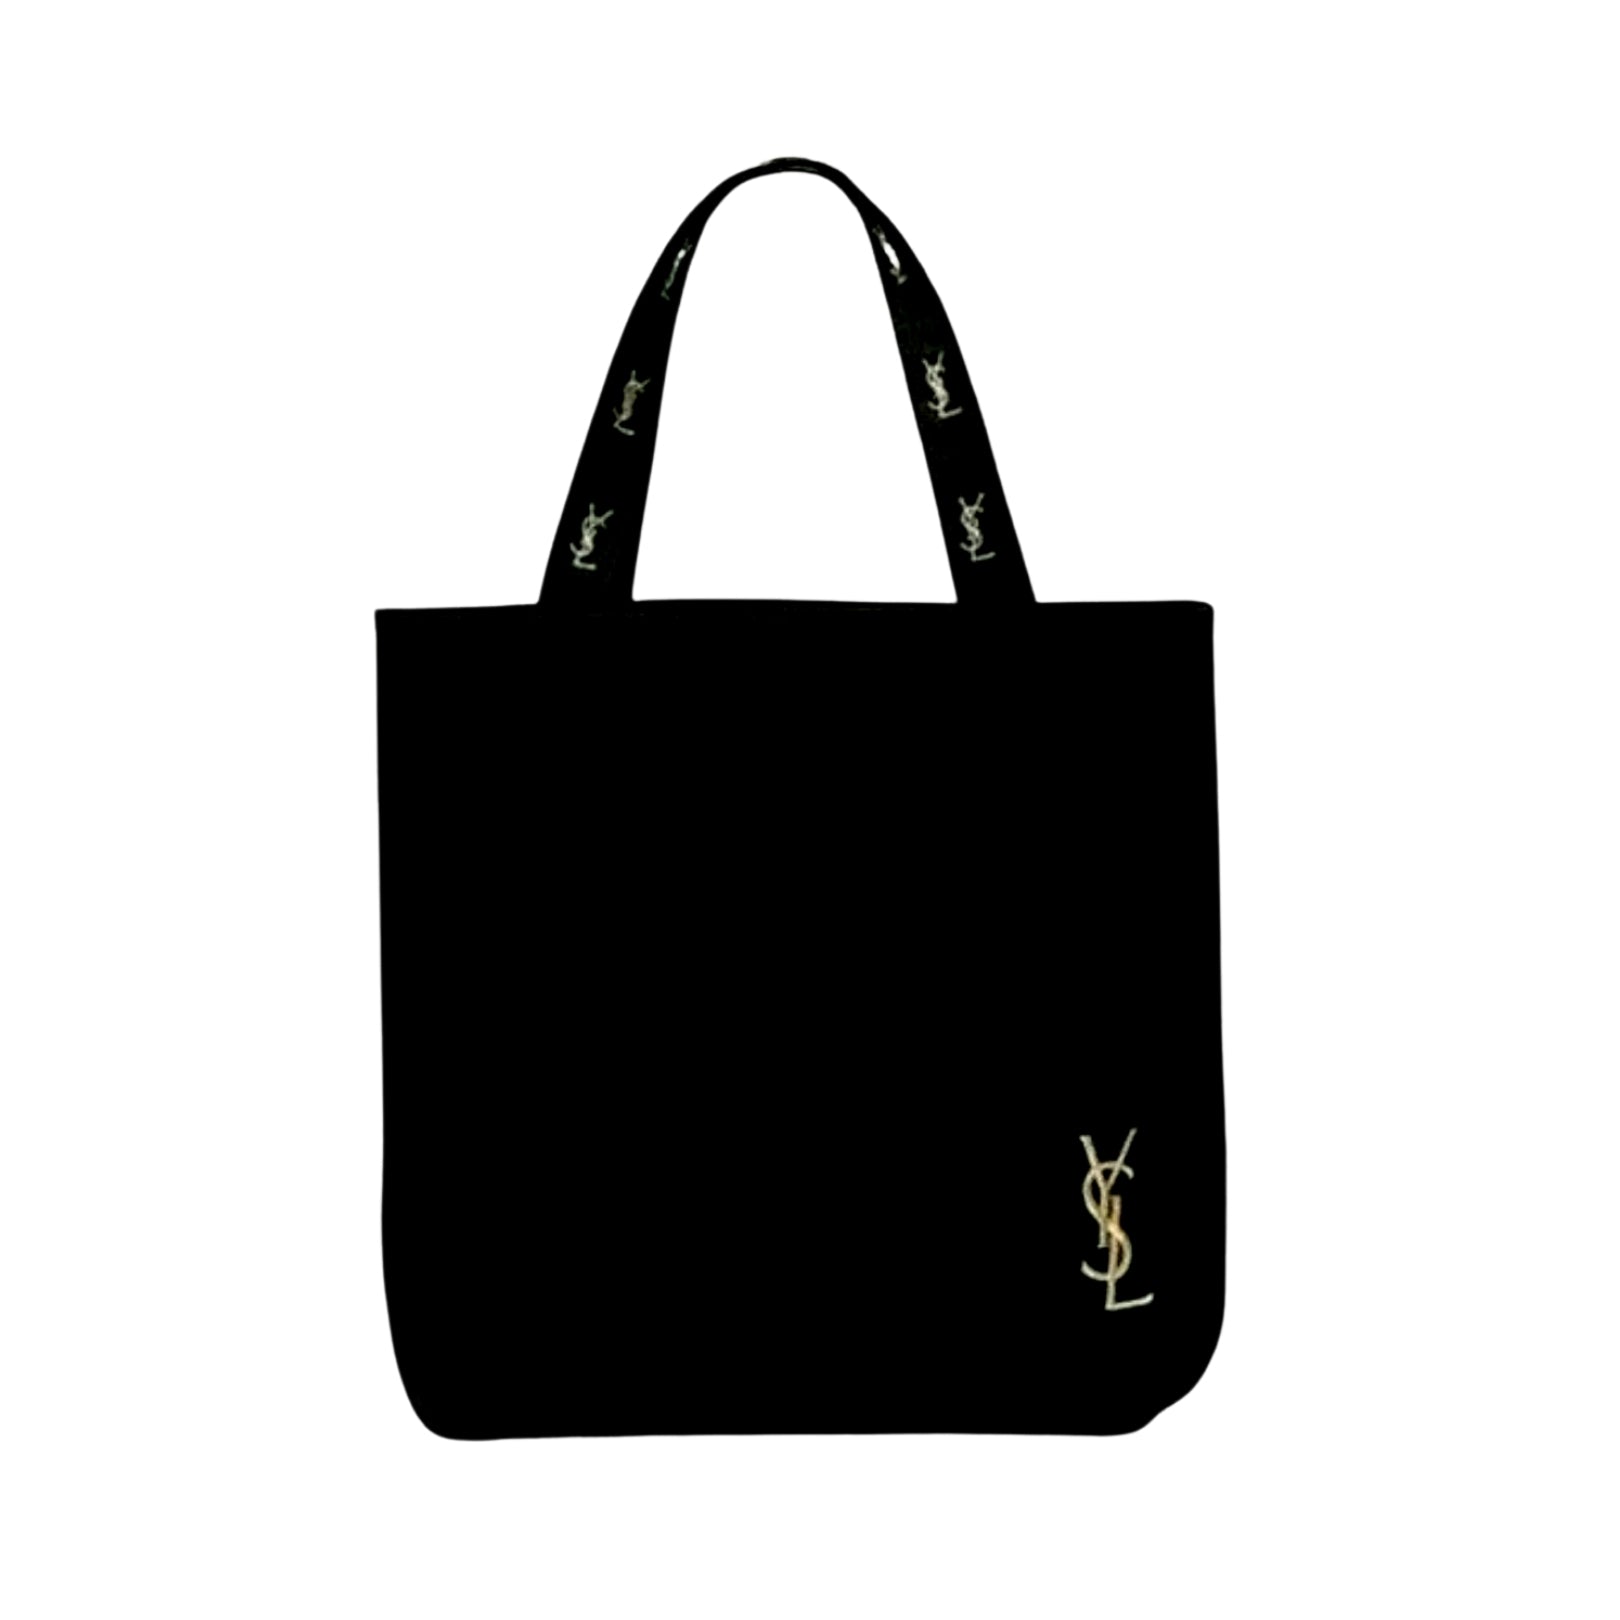 Ysl black shopper tote bag and favorite Pilates Class at The